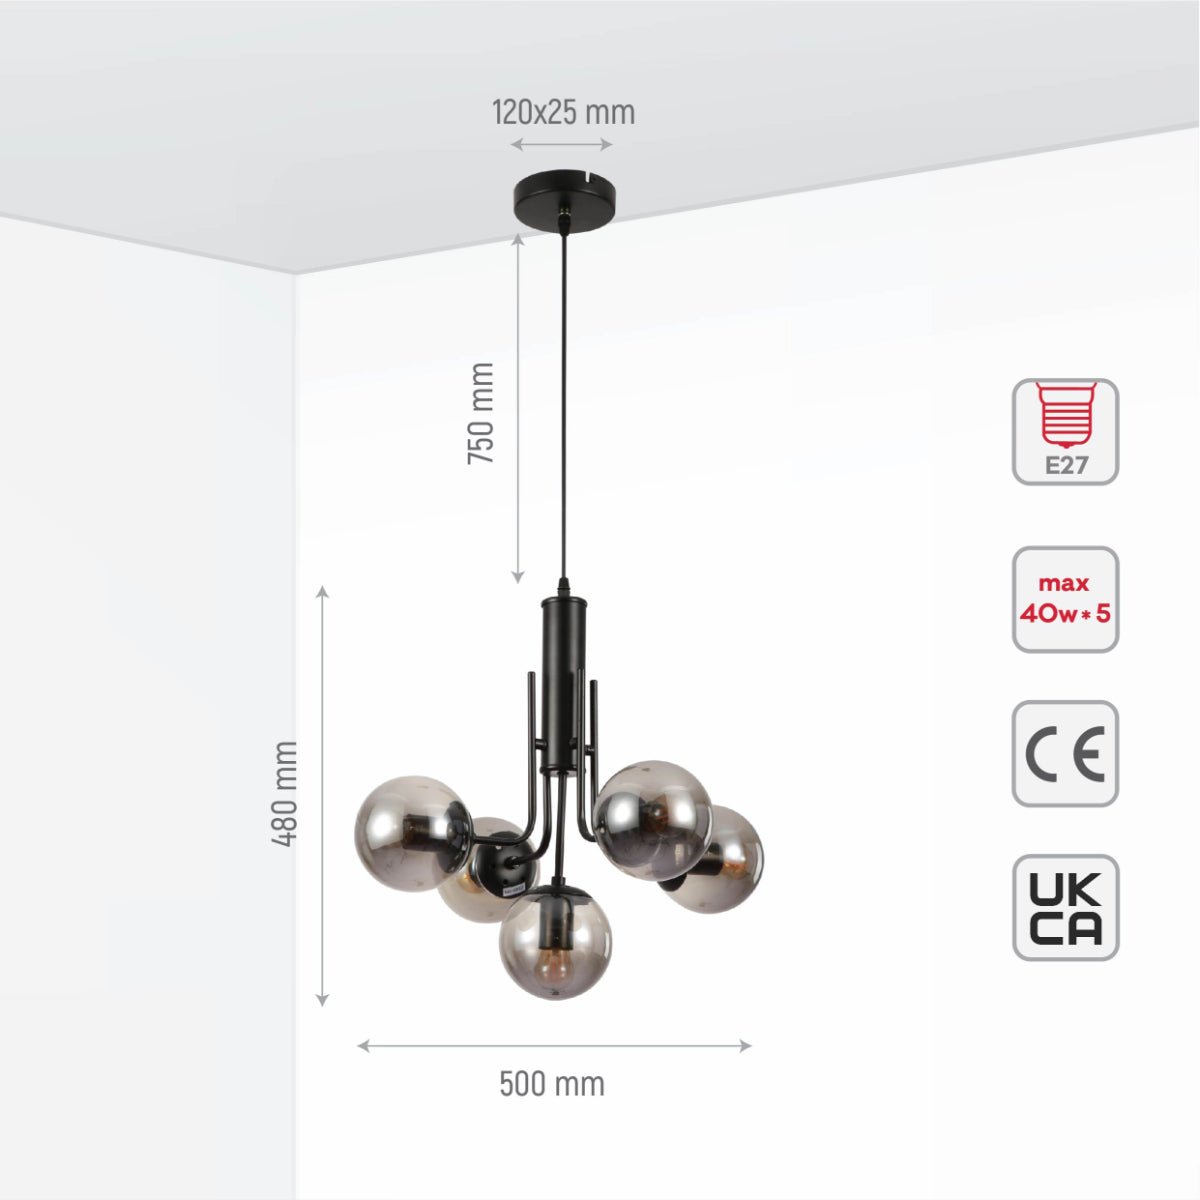 Size and specs of Smoky Globe Glass Black Body Pendant Chandelier Ceiling Light with 5xE27s | TEKLED 159-17412